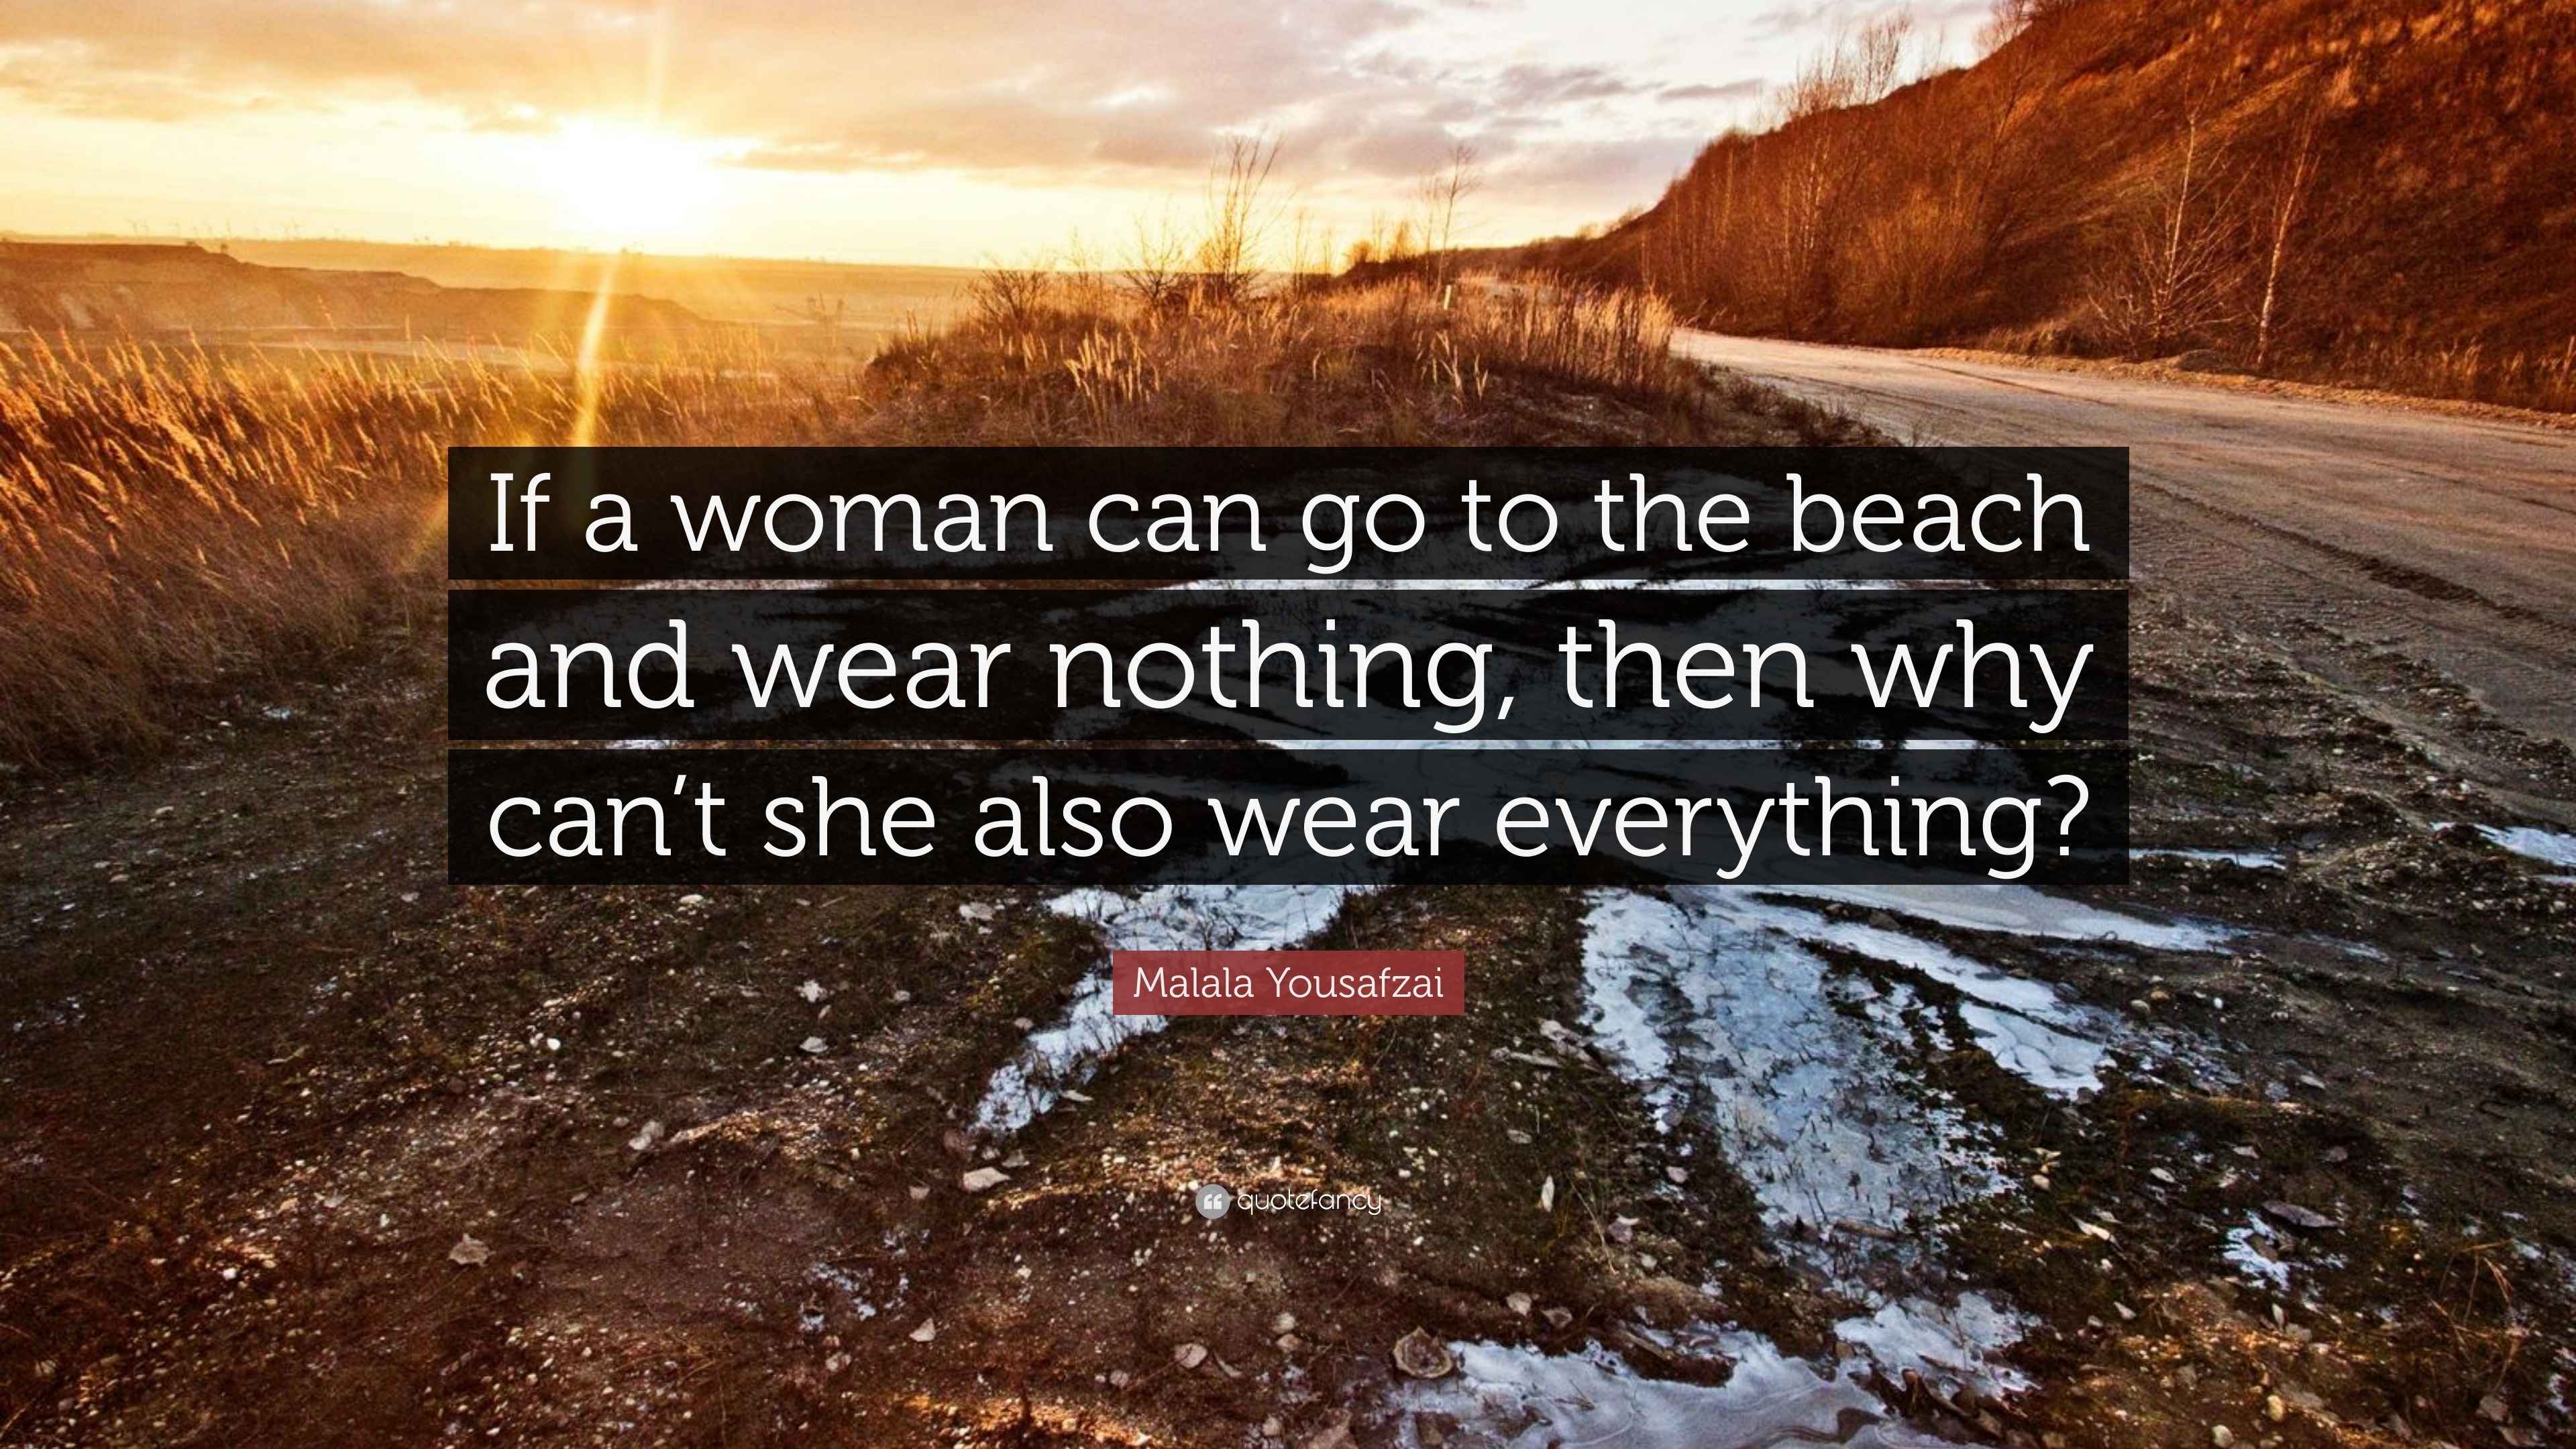 Malala Yousafzai Quote: “If a woman can go to the beach and wear nothing,  then why